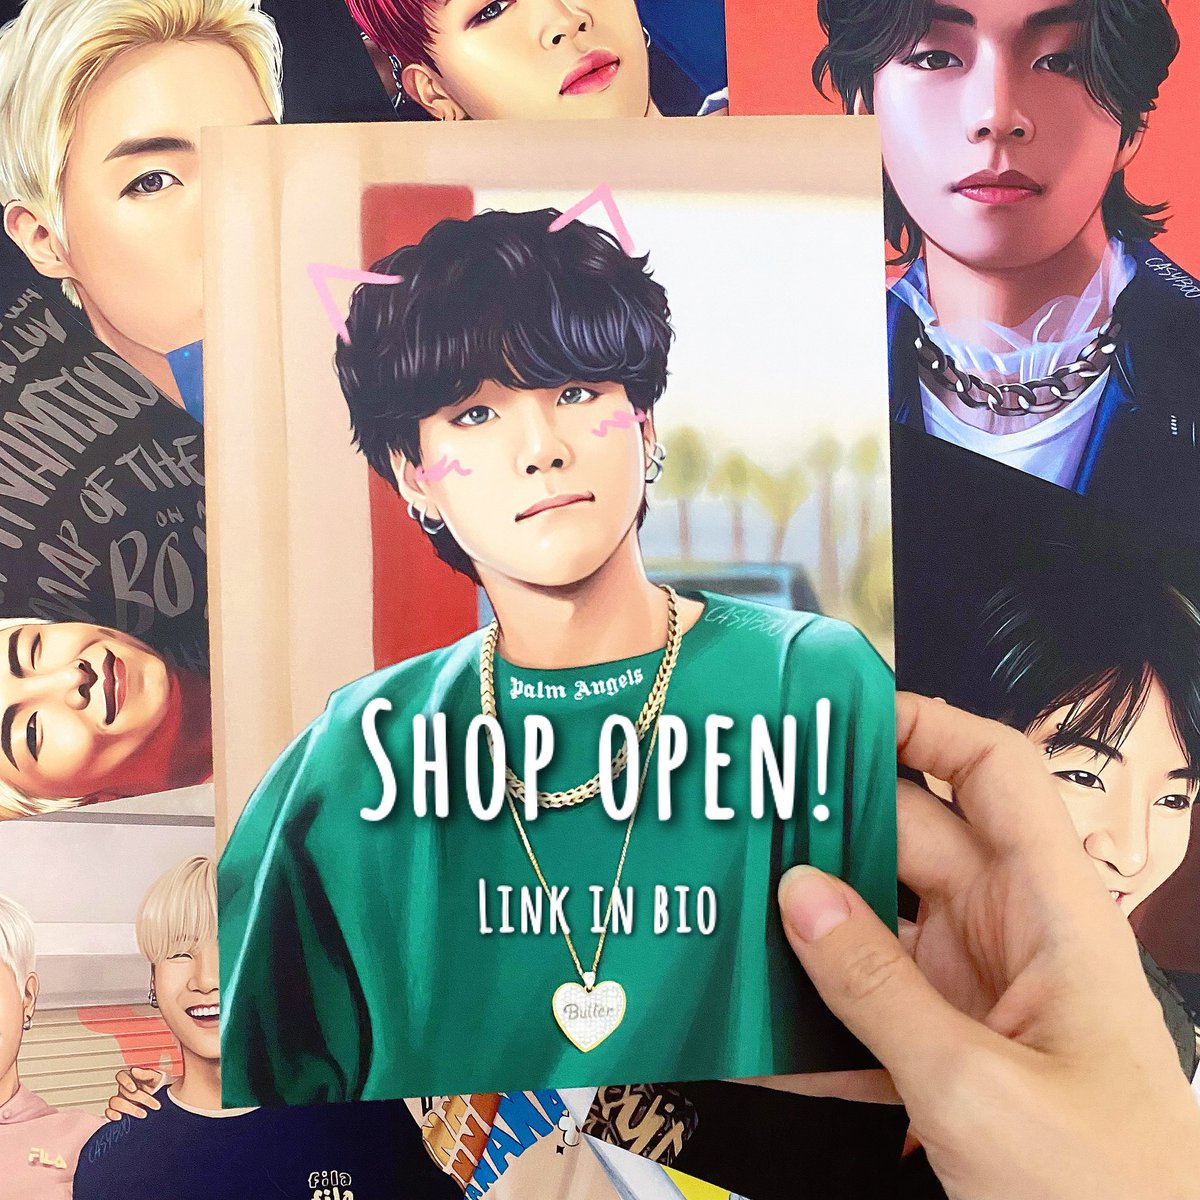 Shop is open! ✨
Find all my prints at casyboo.bigcartel.com

Thanks to everyone that supports and likes what I do🥺 I’m forever grateful!💜

I am giving extra freebies on all orders to celebrate & free untracked shipping on orders over 35€ 🌎

#shopopen #printshop #btsfanart